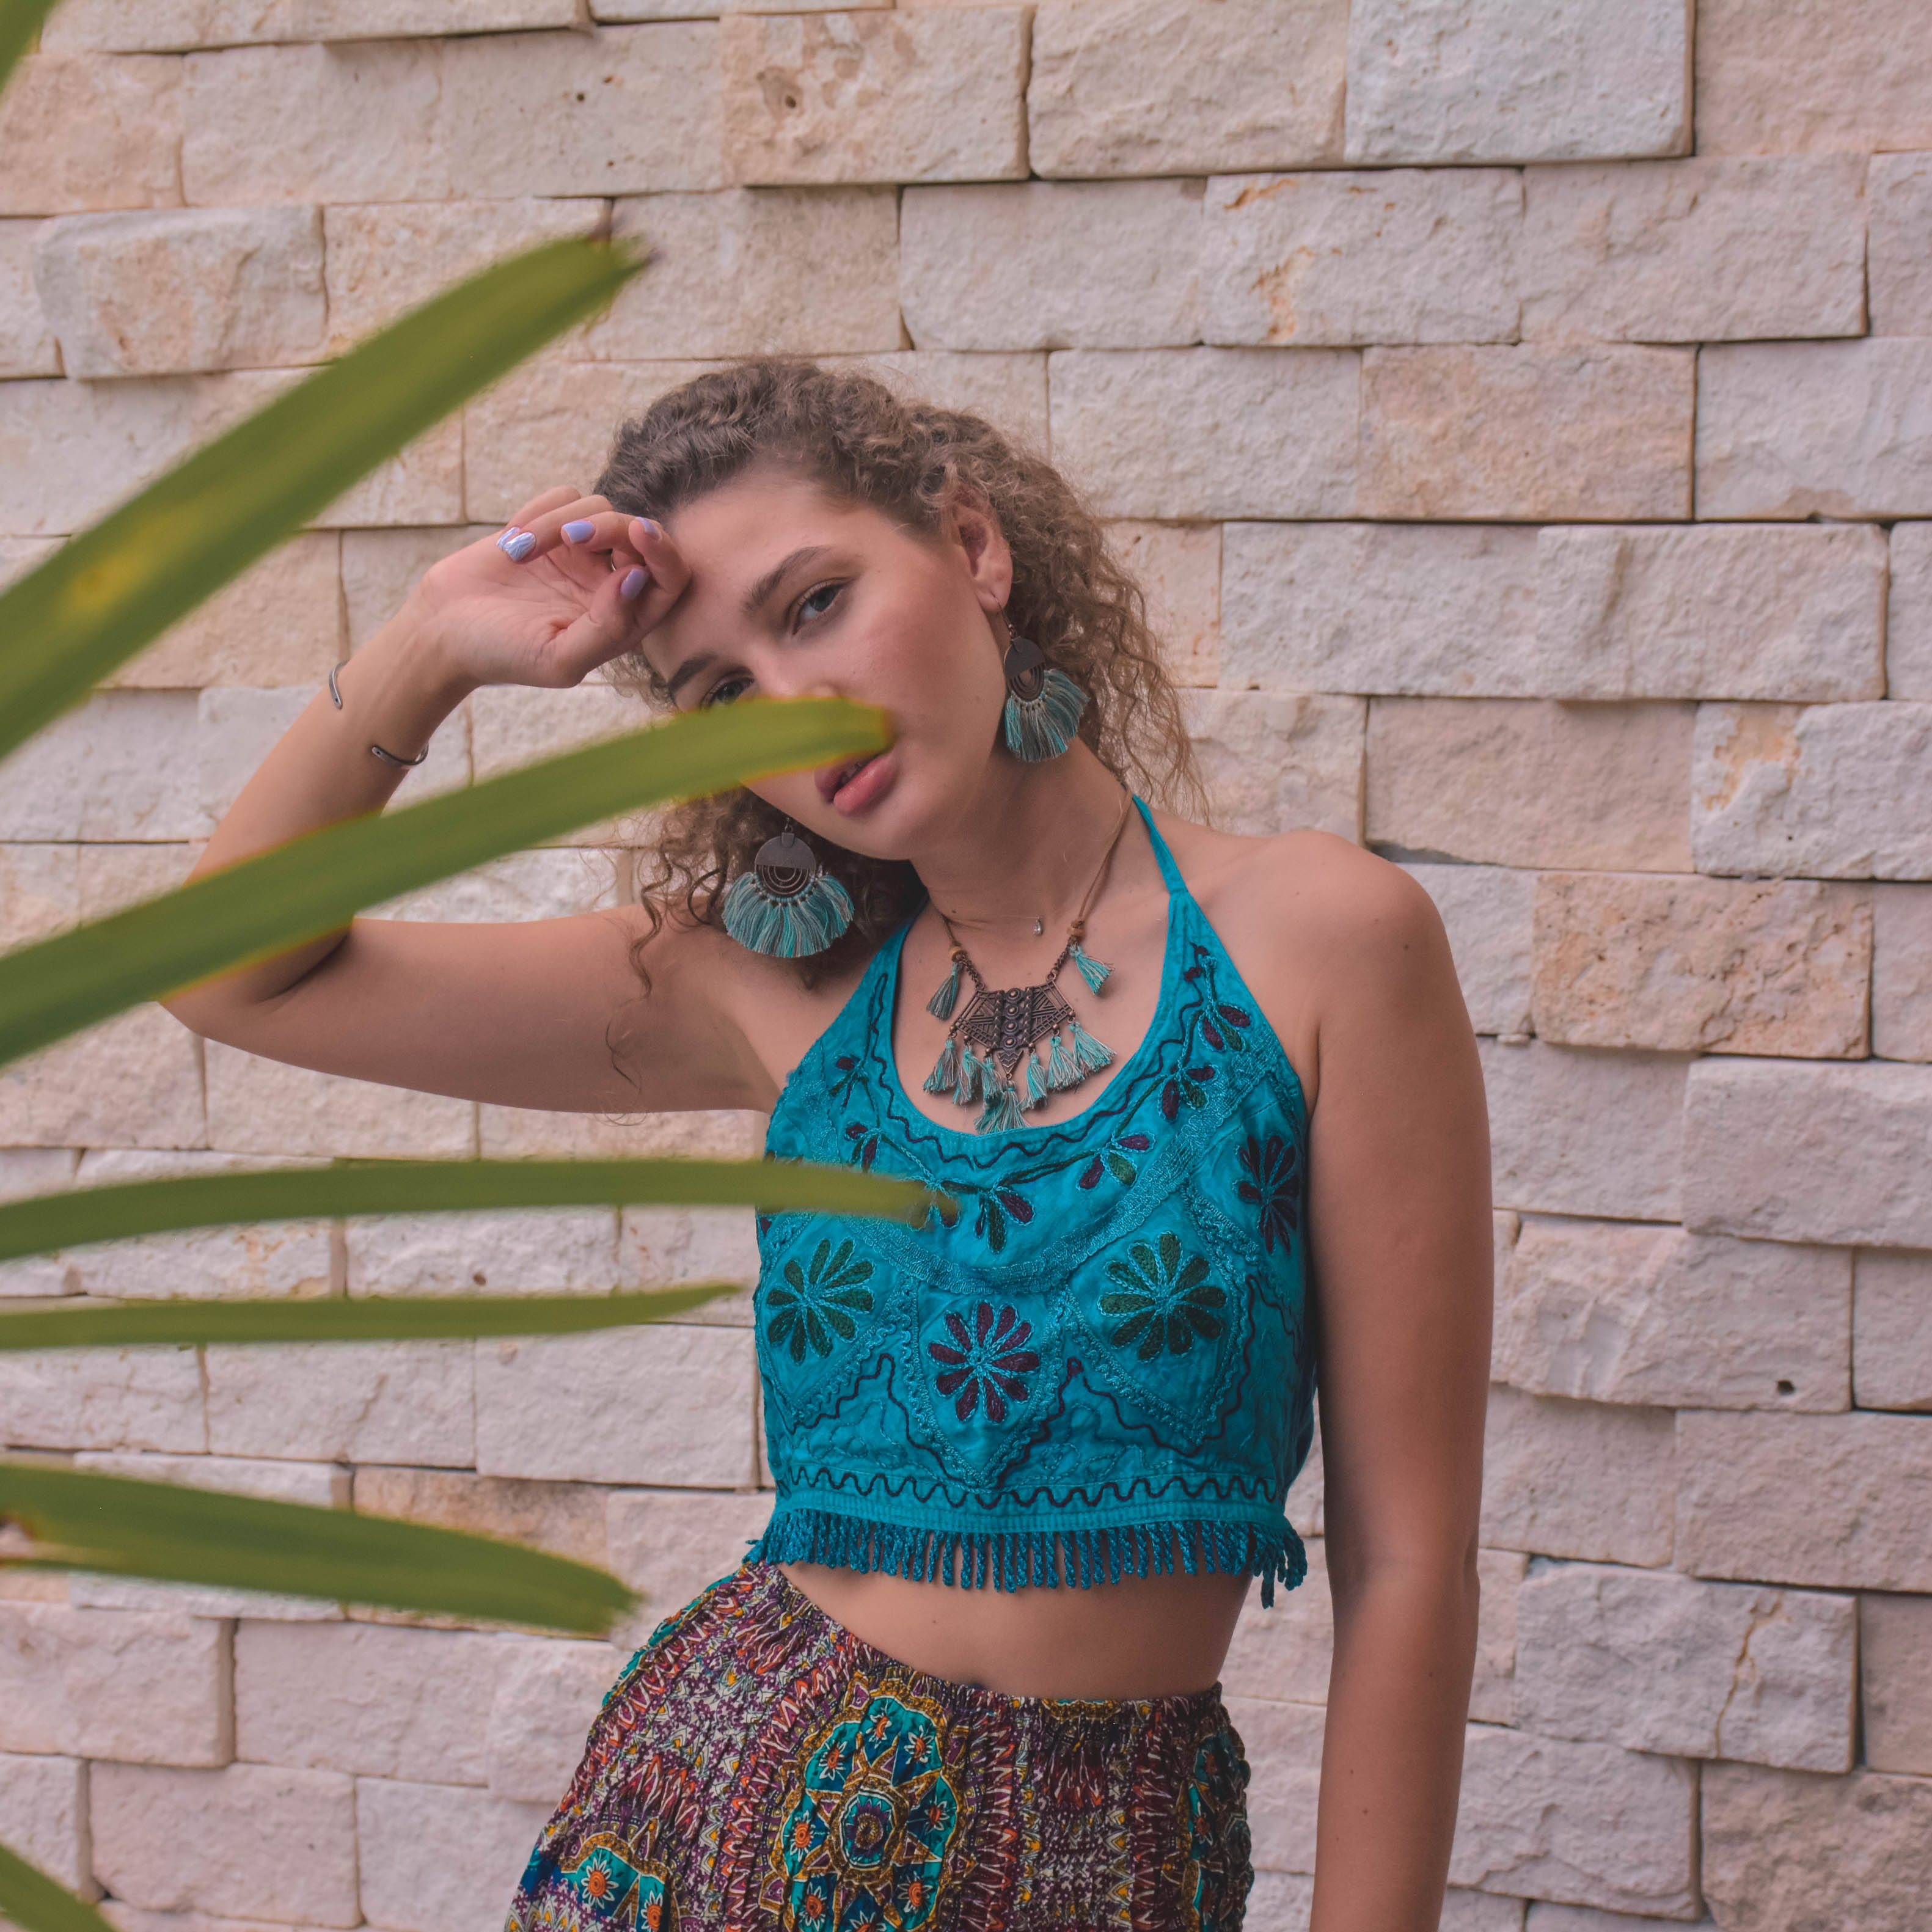 PERSIA NECKLACE Elepanta Necklaces - Buy Today Elephant Pants Jewelry And Bohemian Clothes Handmade In Thailand Help To Save The Elephants FairTrade And Vegan